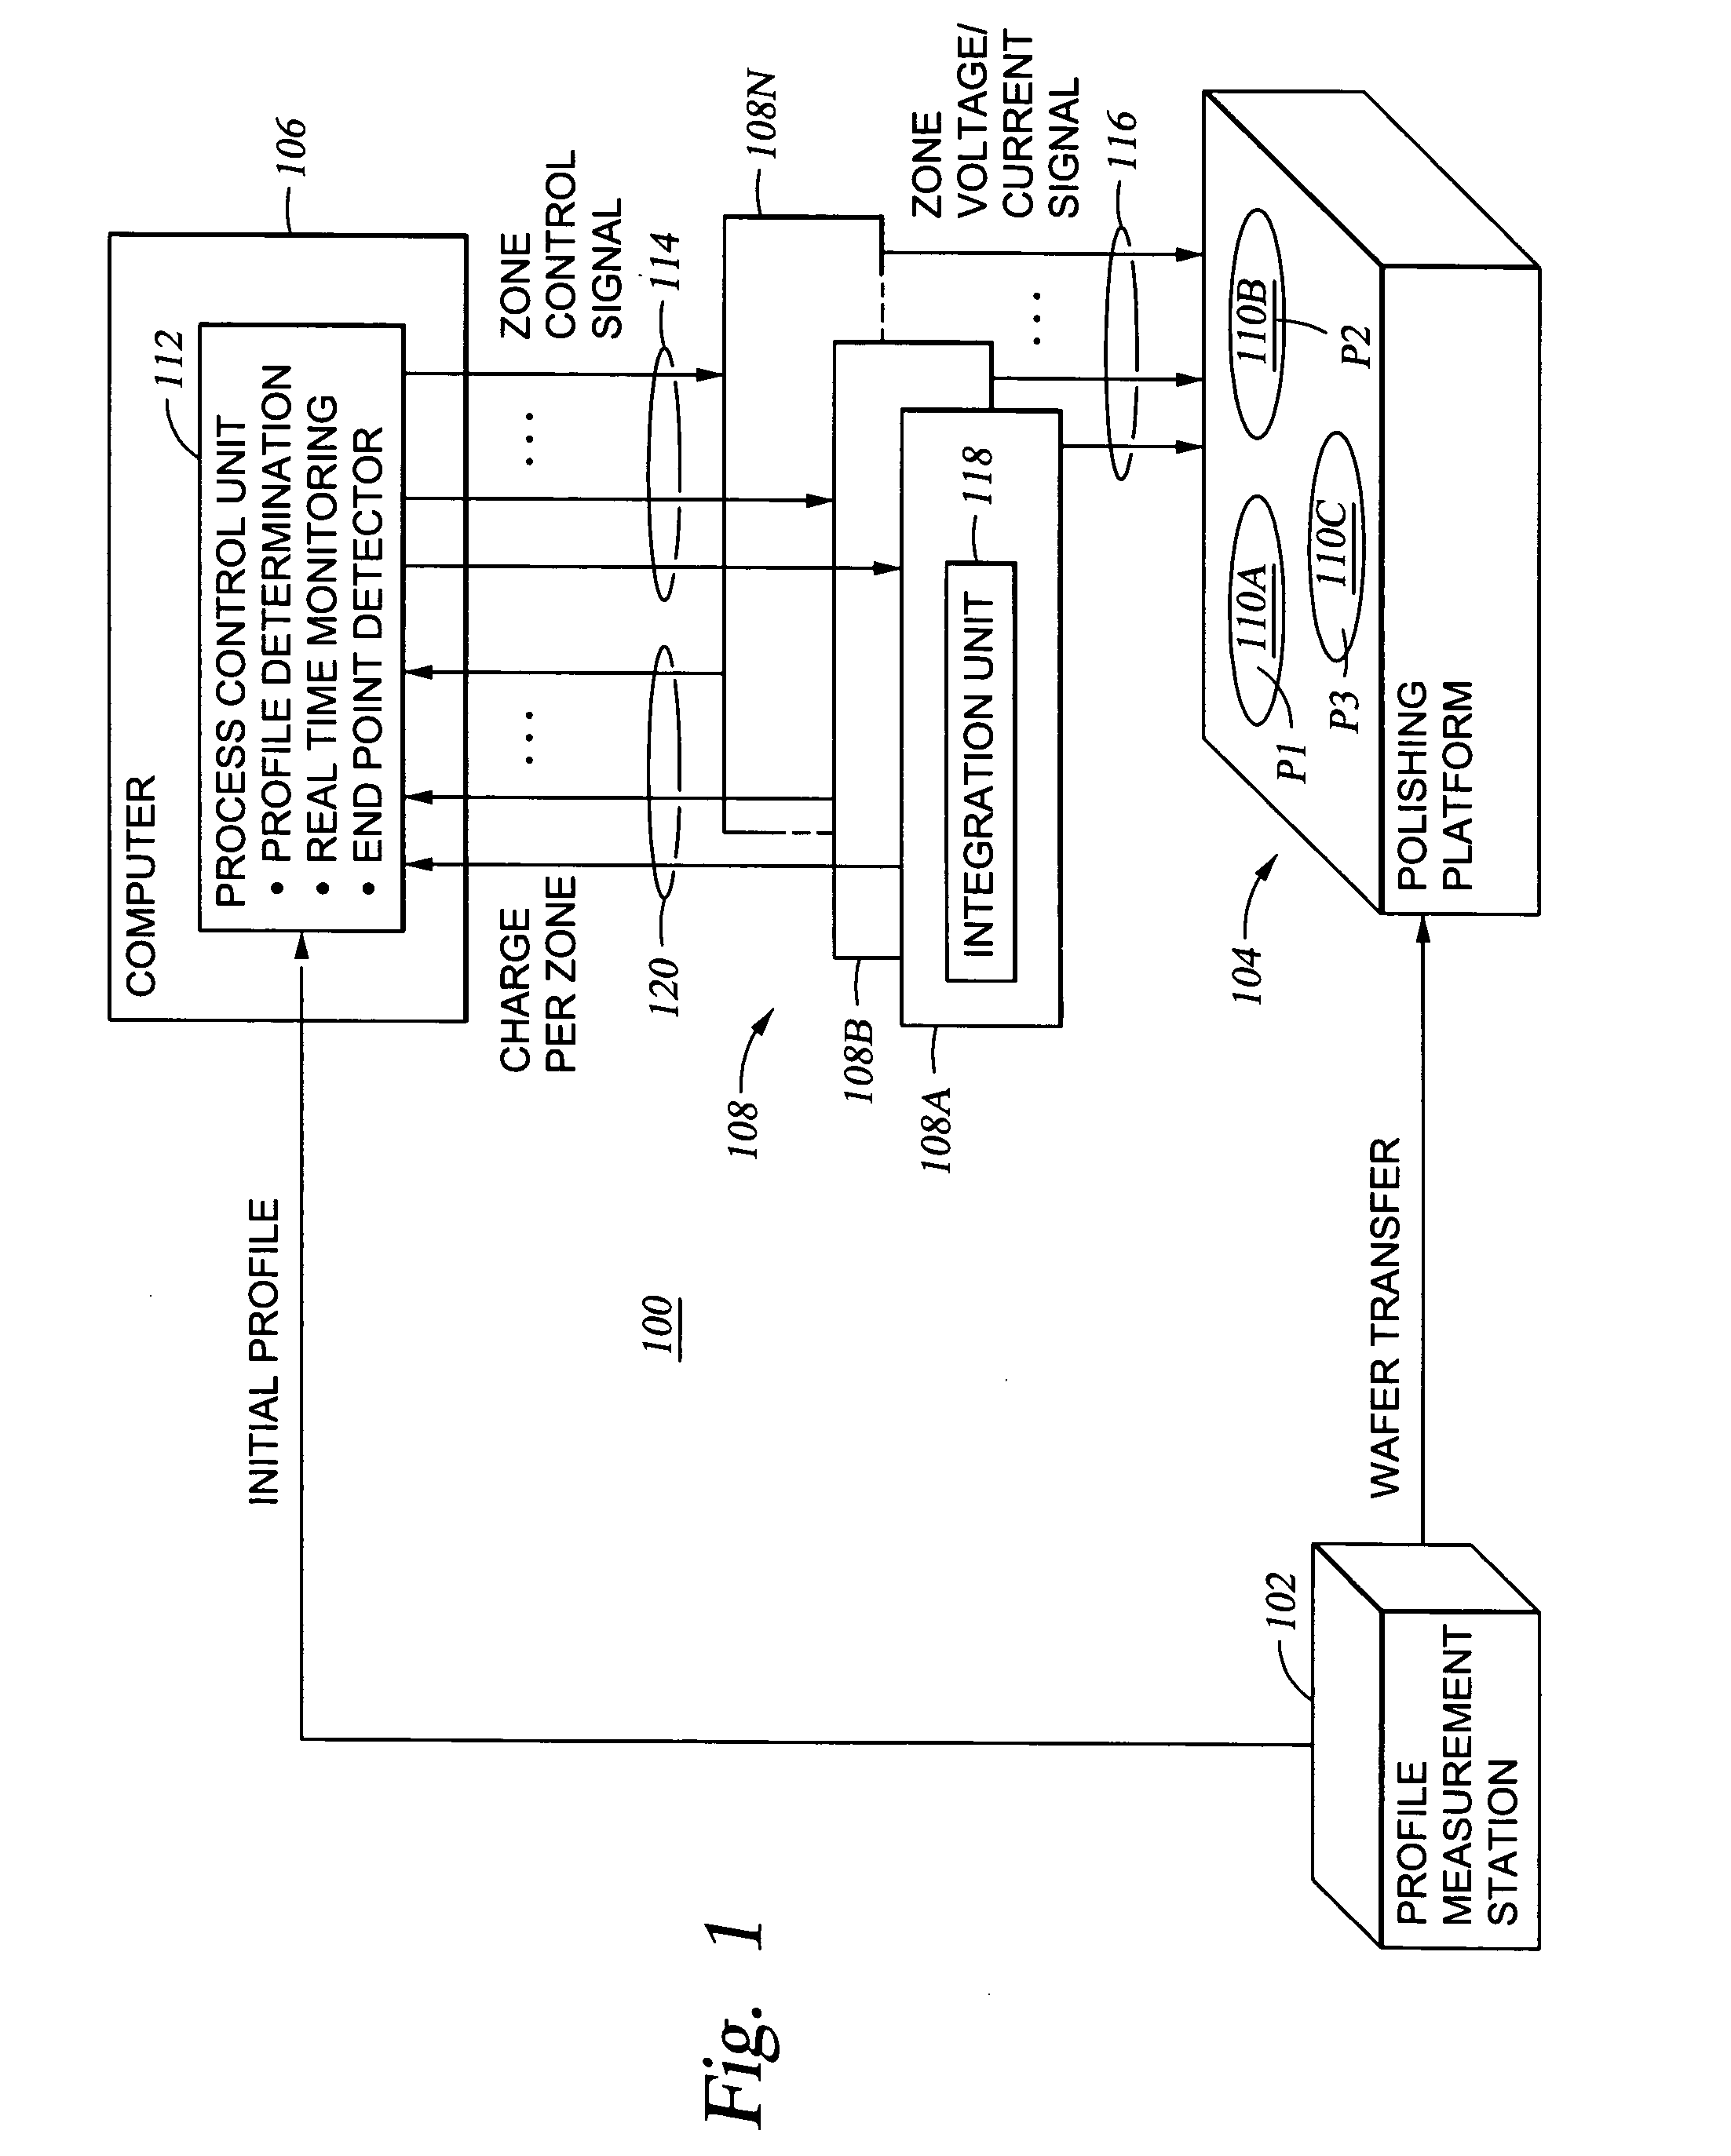 Endpoint compensation in electroprocessing